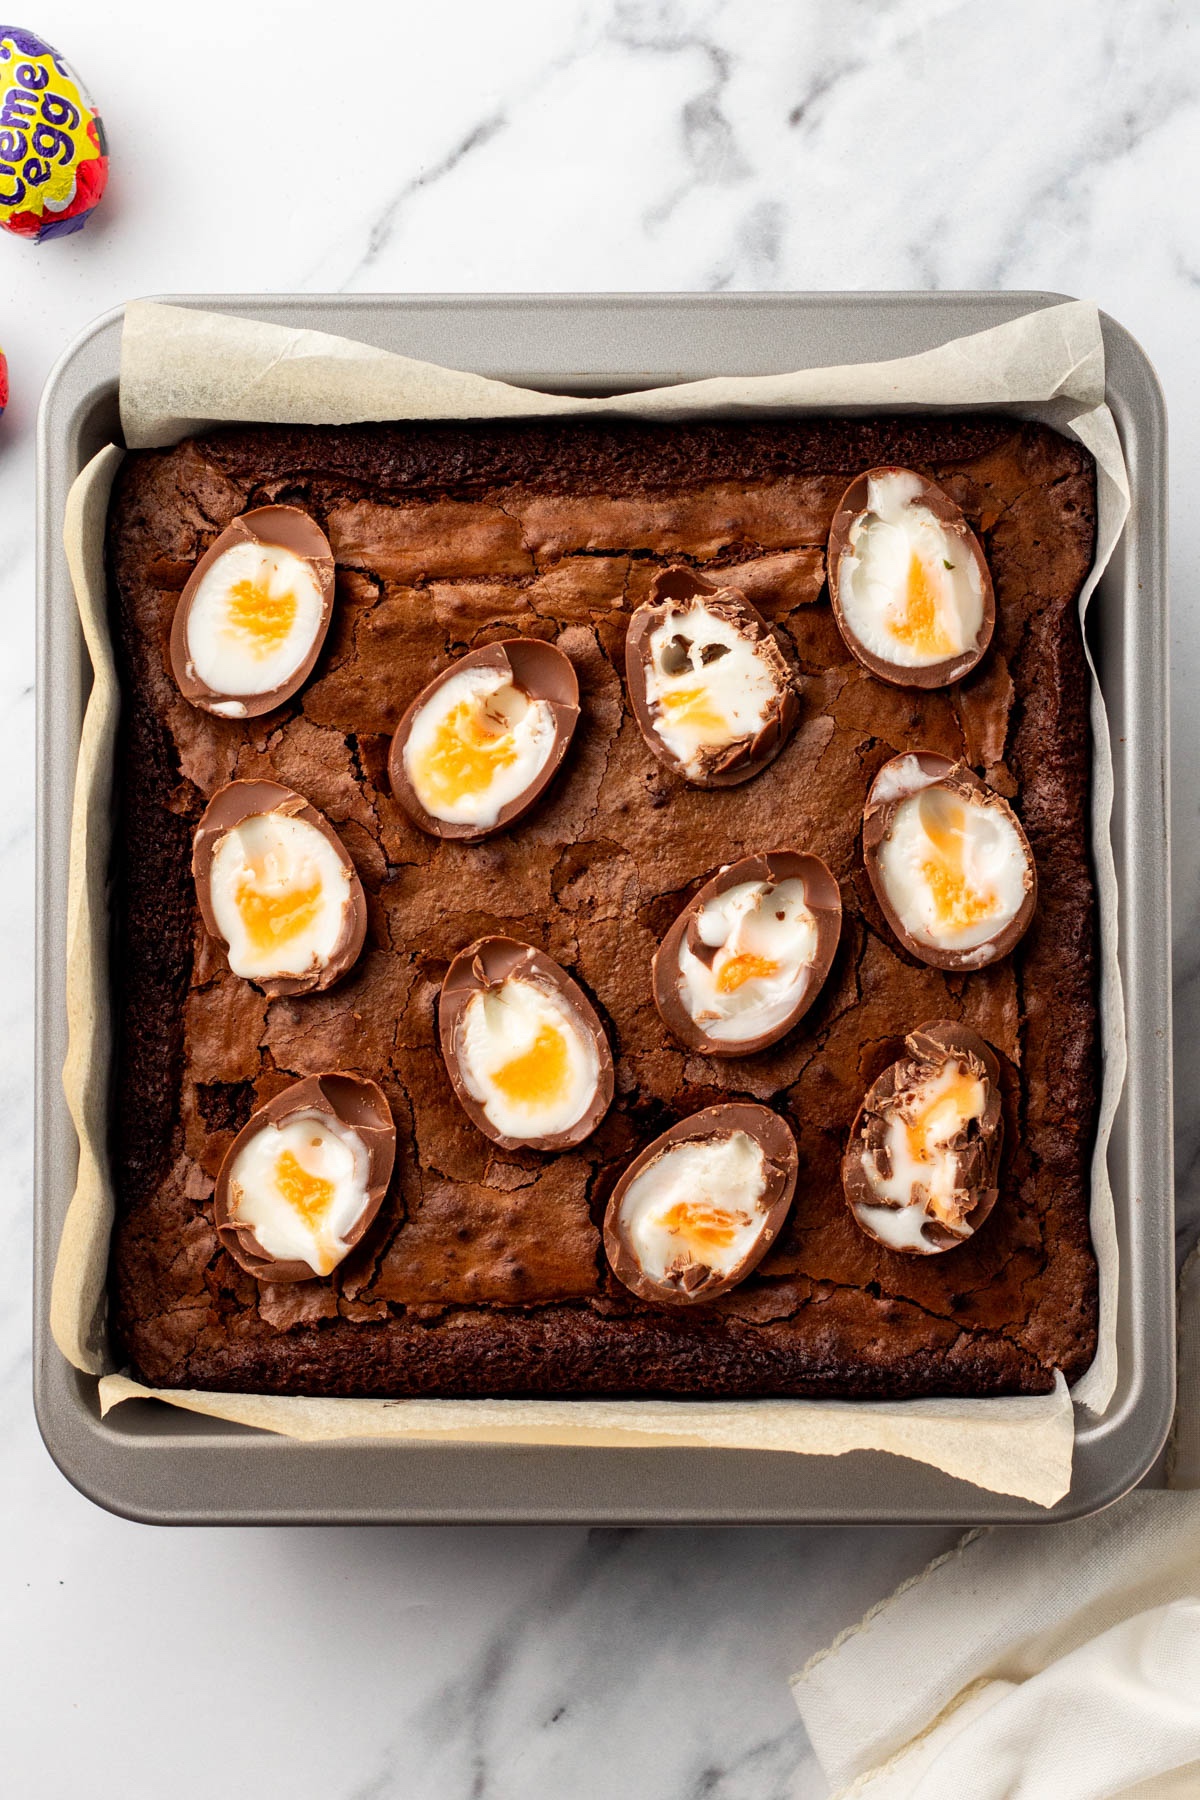 Cadbury eggs pushed down into the brownies